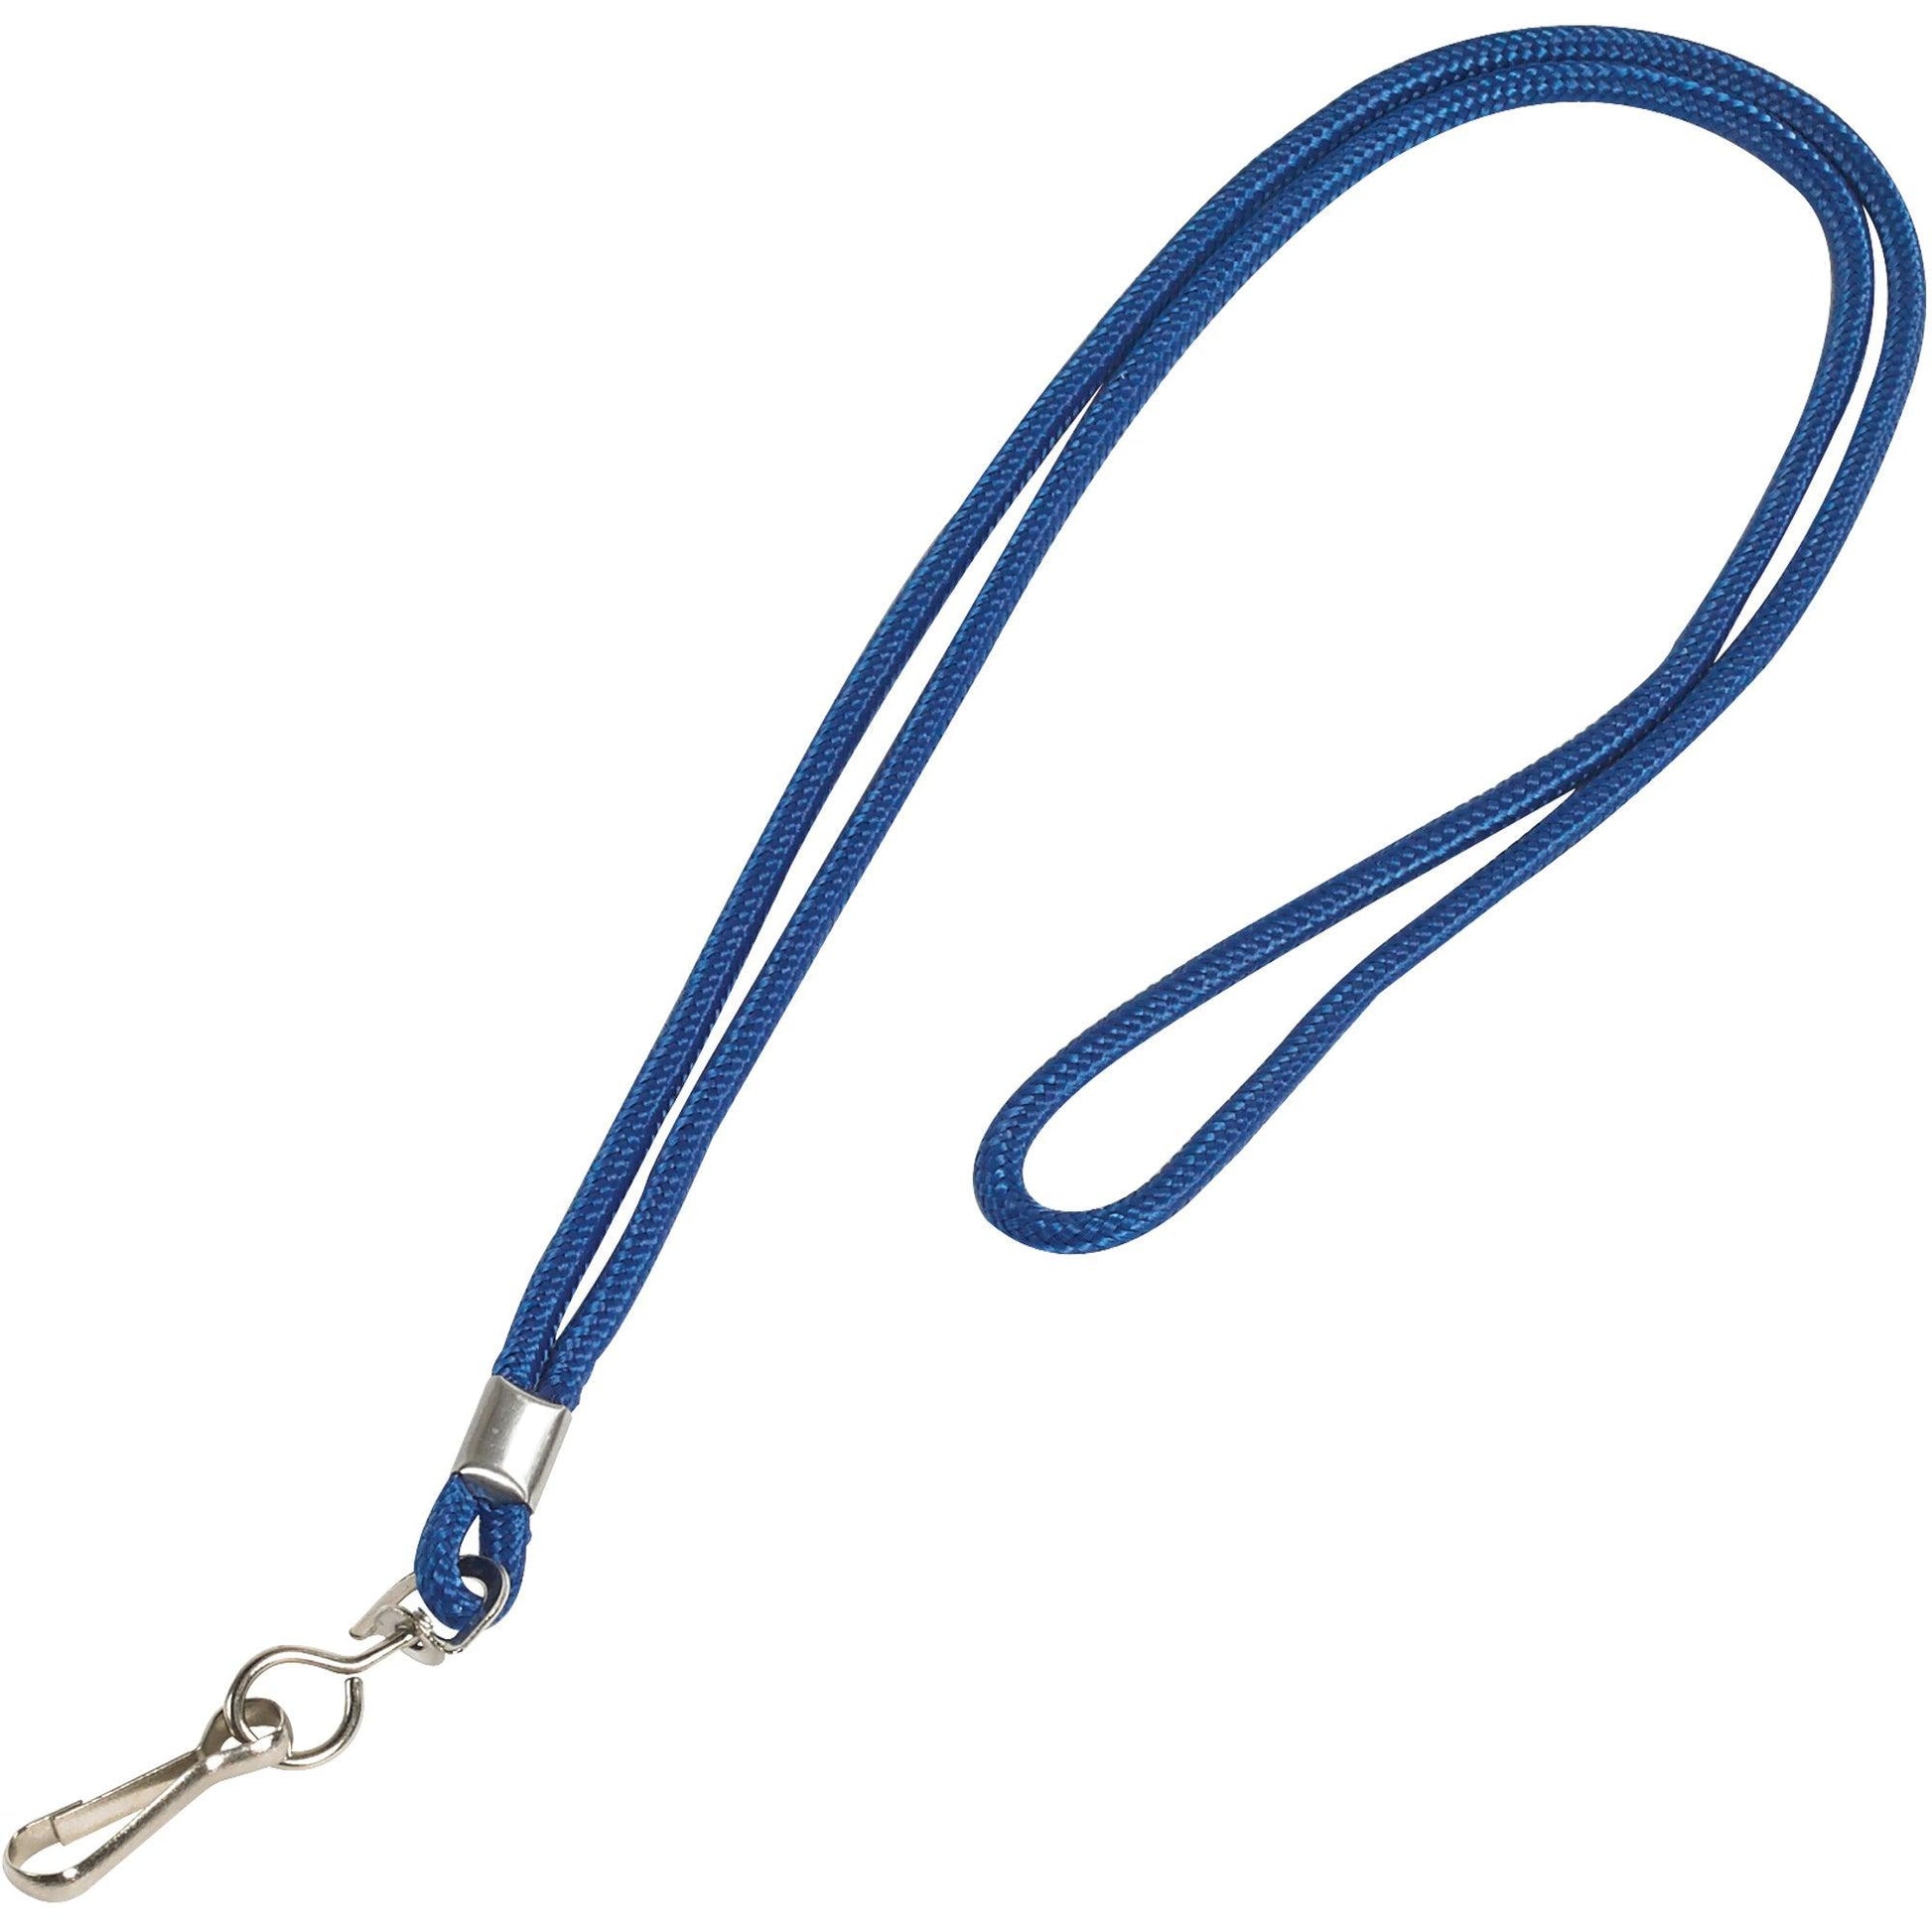 Standard Blue Lanyard with Hook - LY102